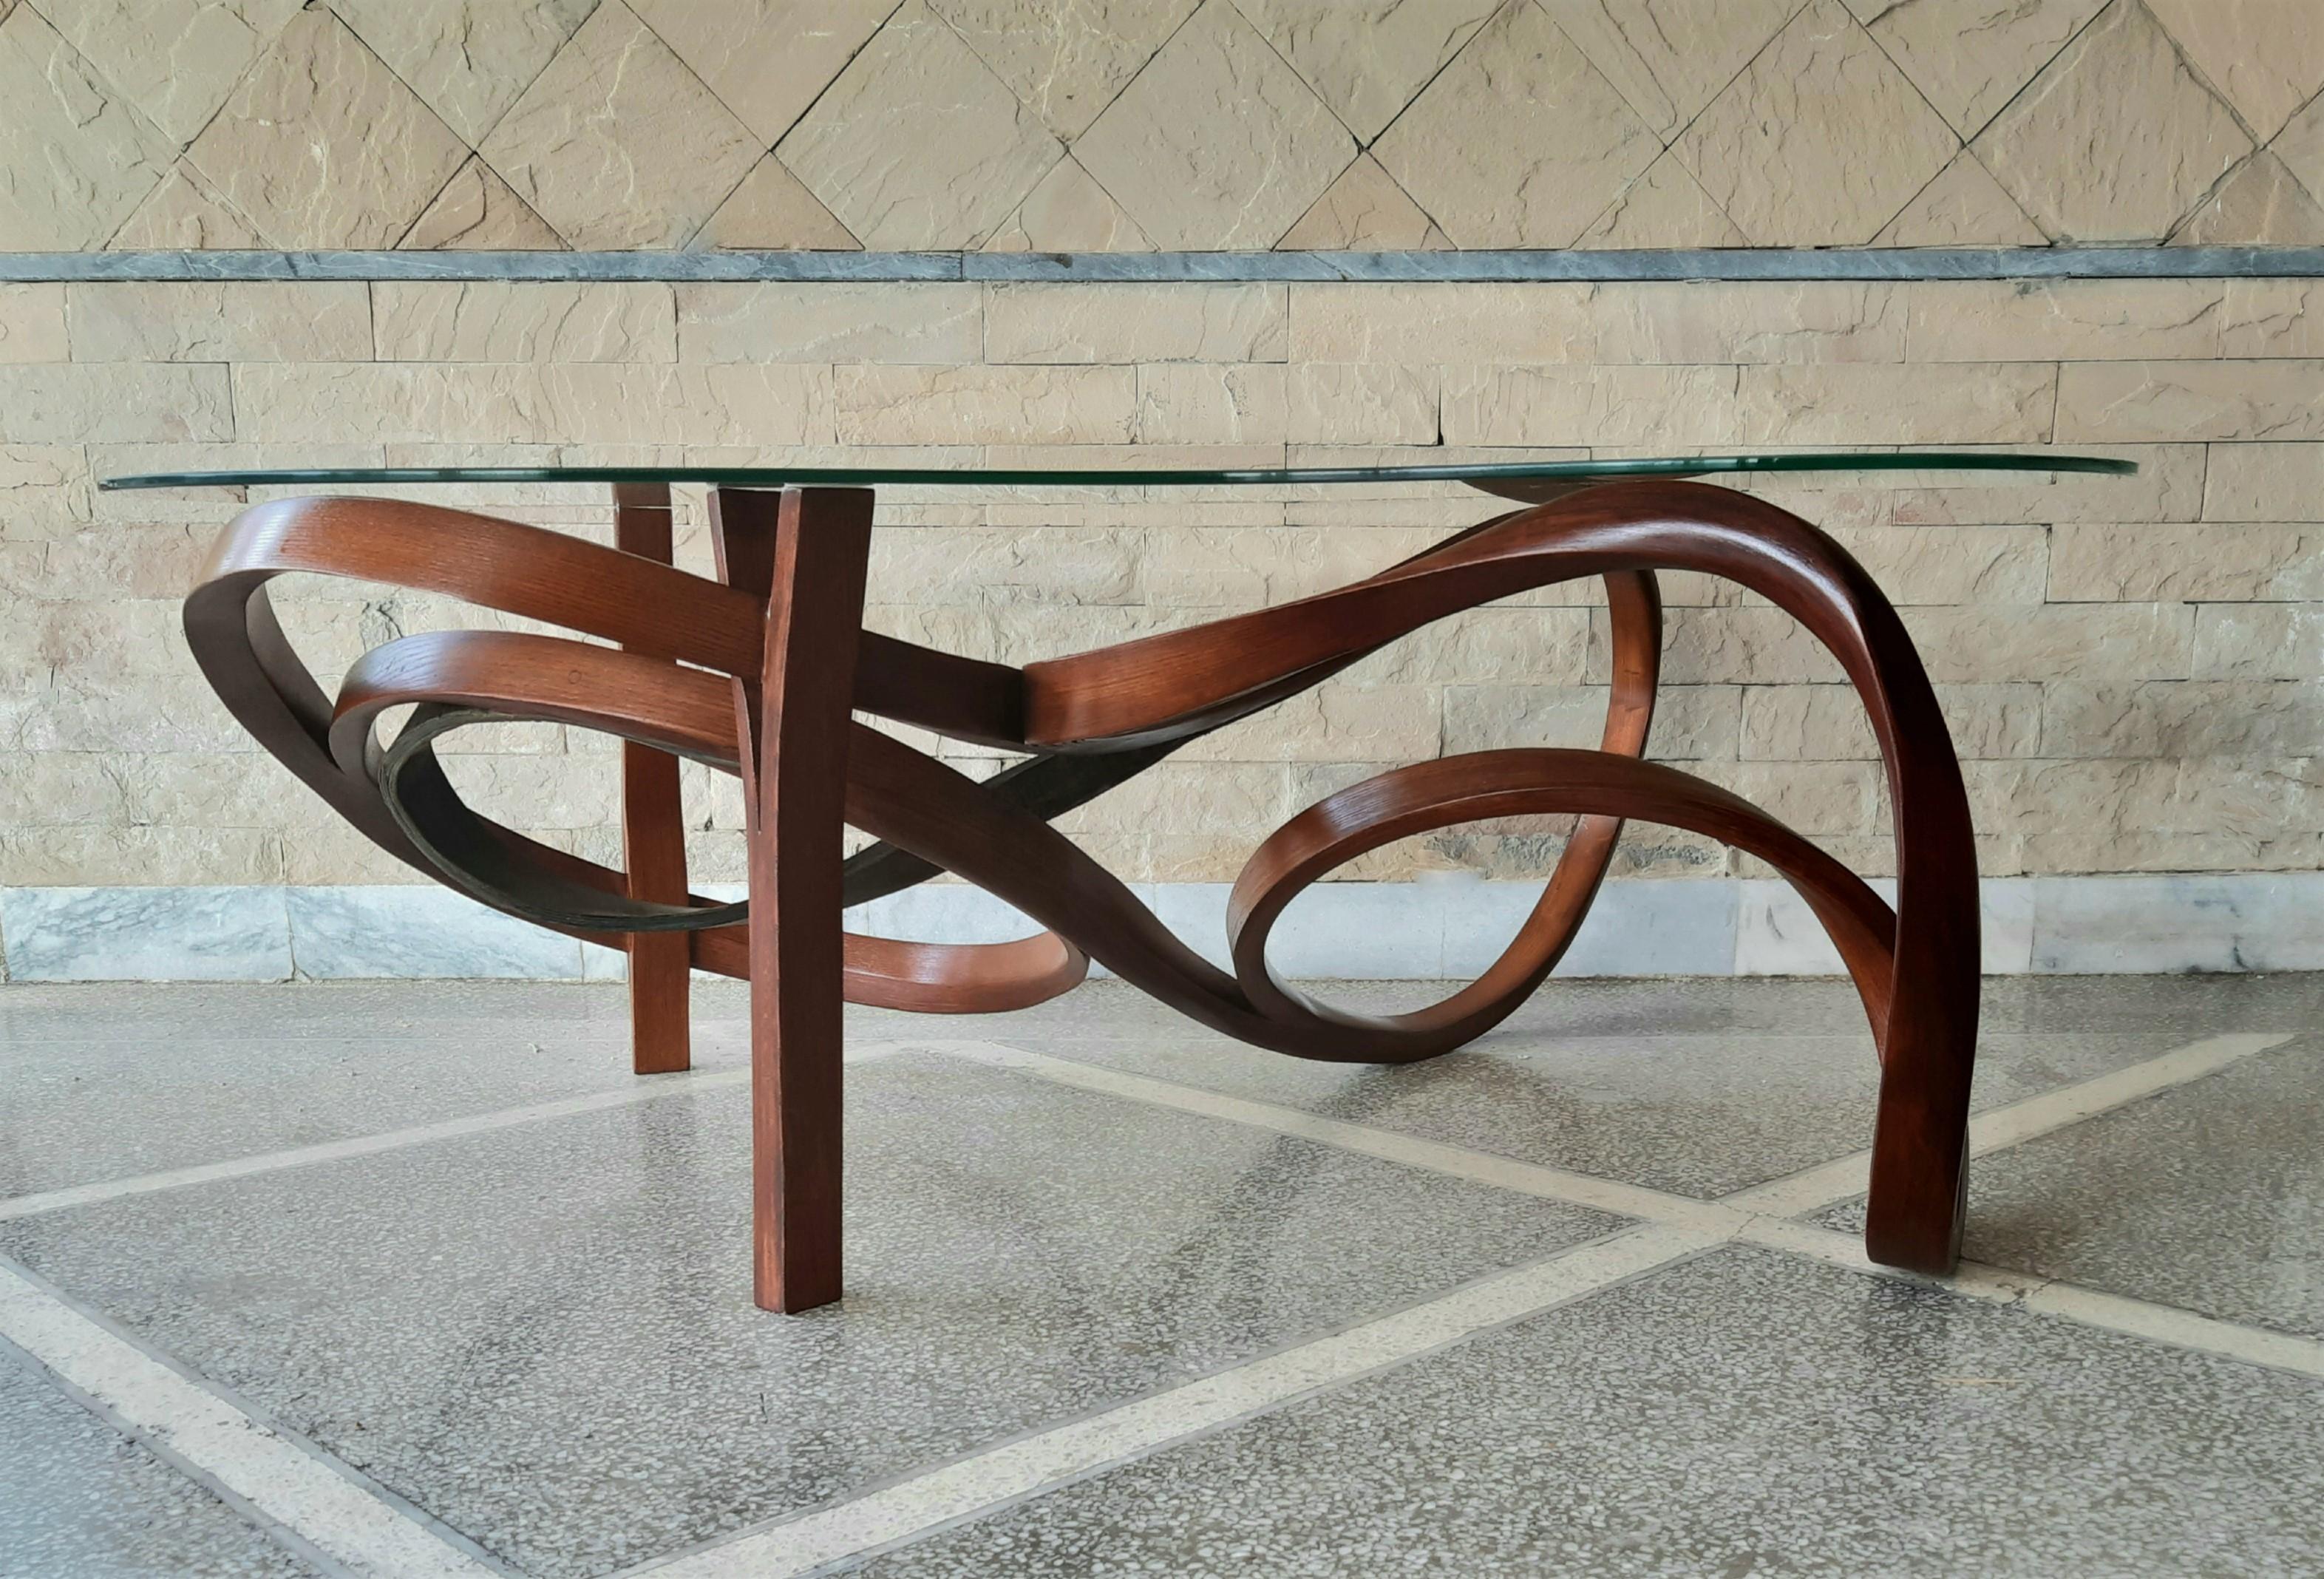 Pakistani Centre Table No. 7 - Vrksa Series by Raka Studio made in Ash Wood and Leather For Sale